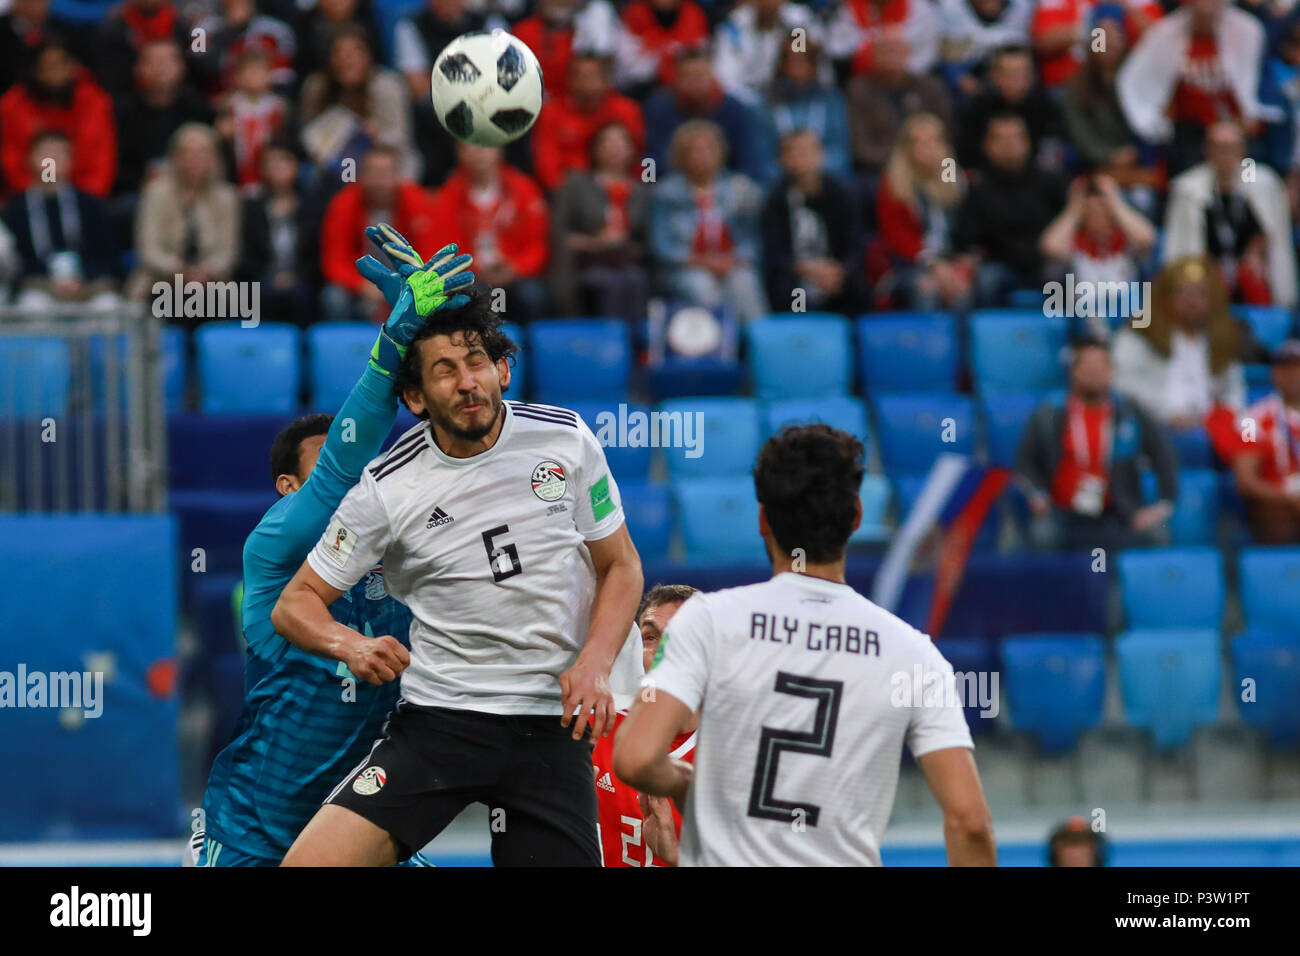 St Petersburg, Russia. 19th Jun, 2018.  RUSSIA VS EGYPT - Ahmed Hegazy during the match between Russia and Egypt valid for the 2018 World Cup held at the Zenit Arena in St. Petersburg, Russia. (Photo: Ricardo Moreira/Fotoarena) Credit: Foto Arena LTDA/Alamy Live News Stock Photo